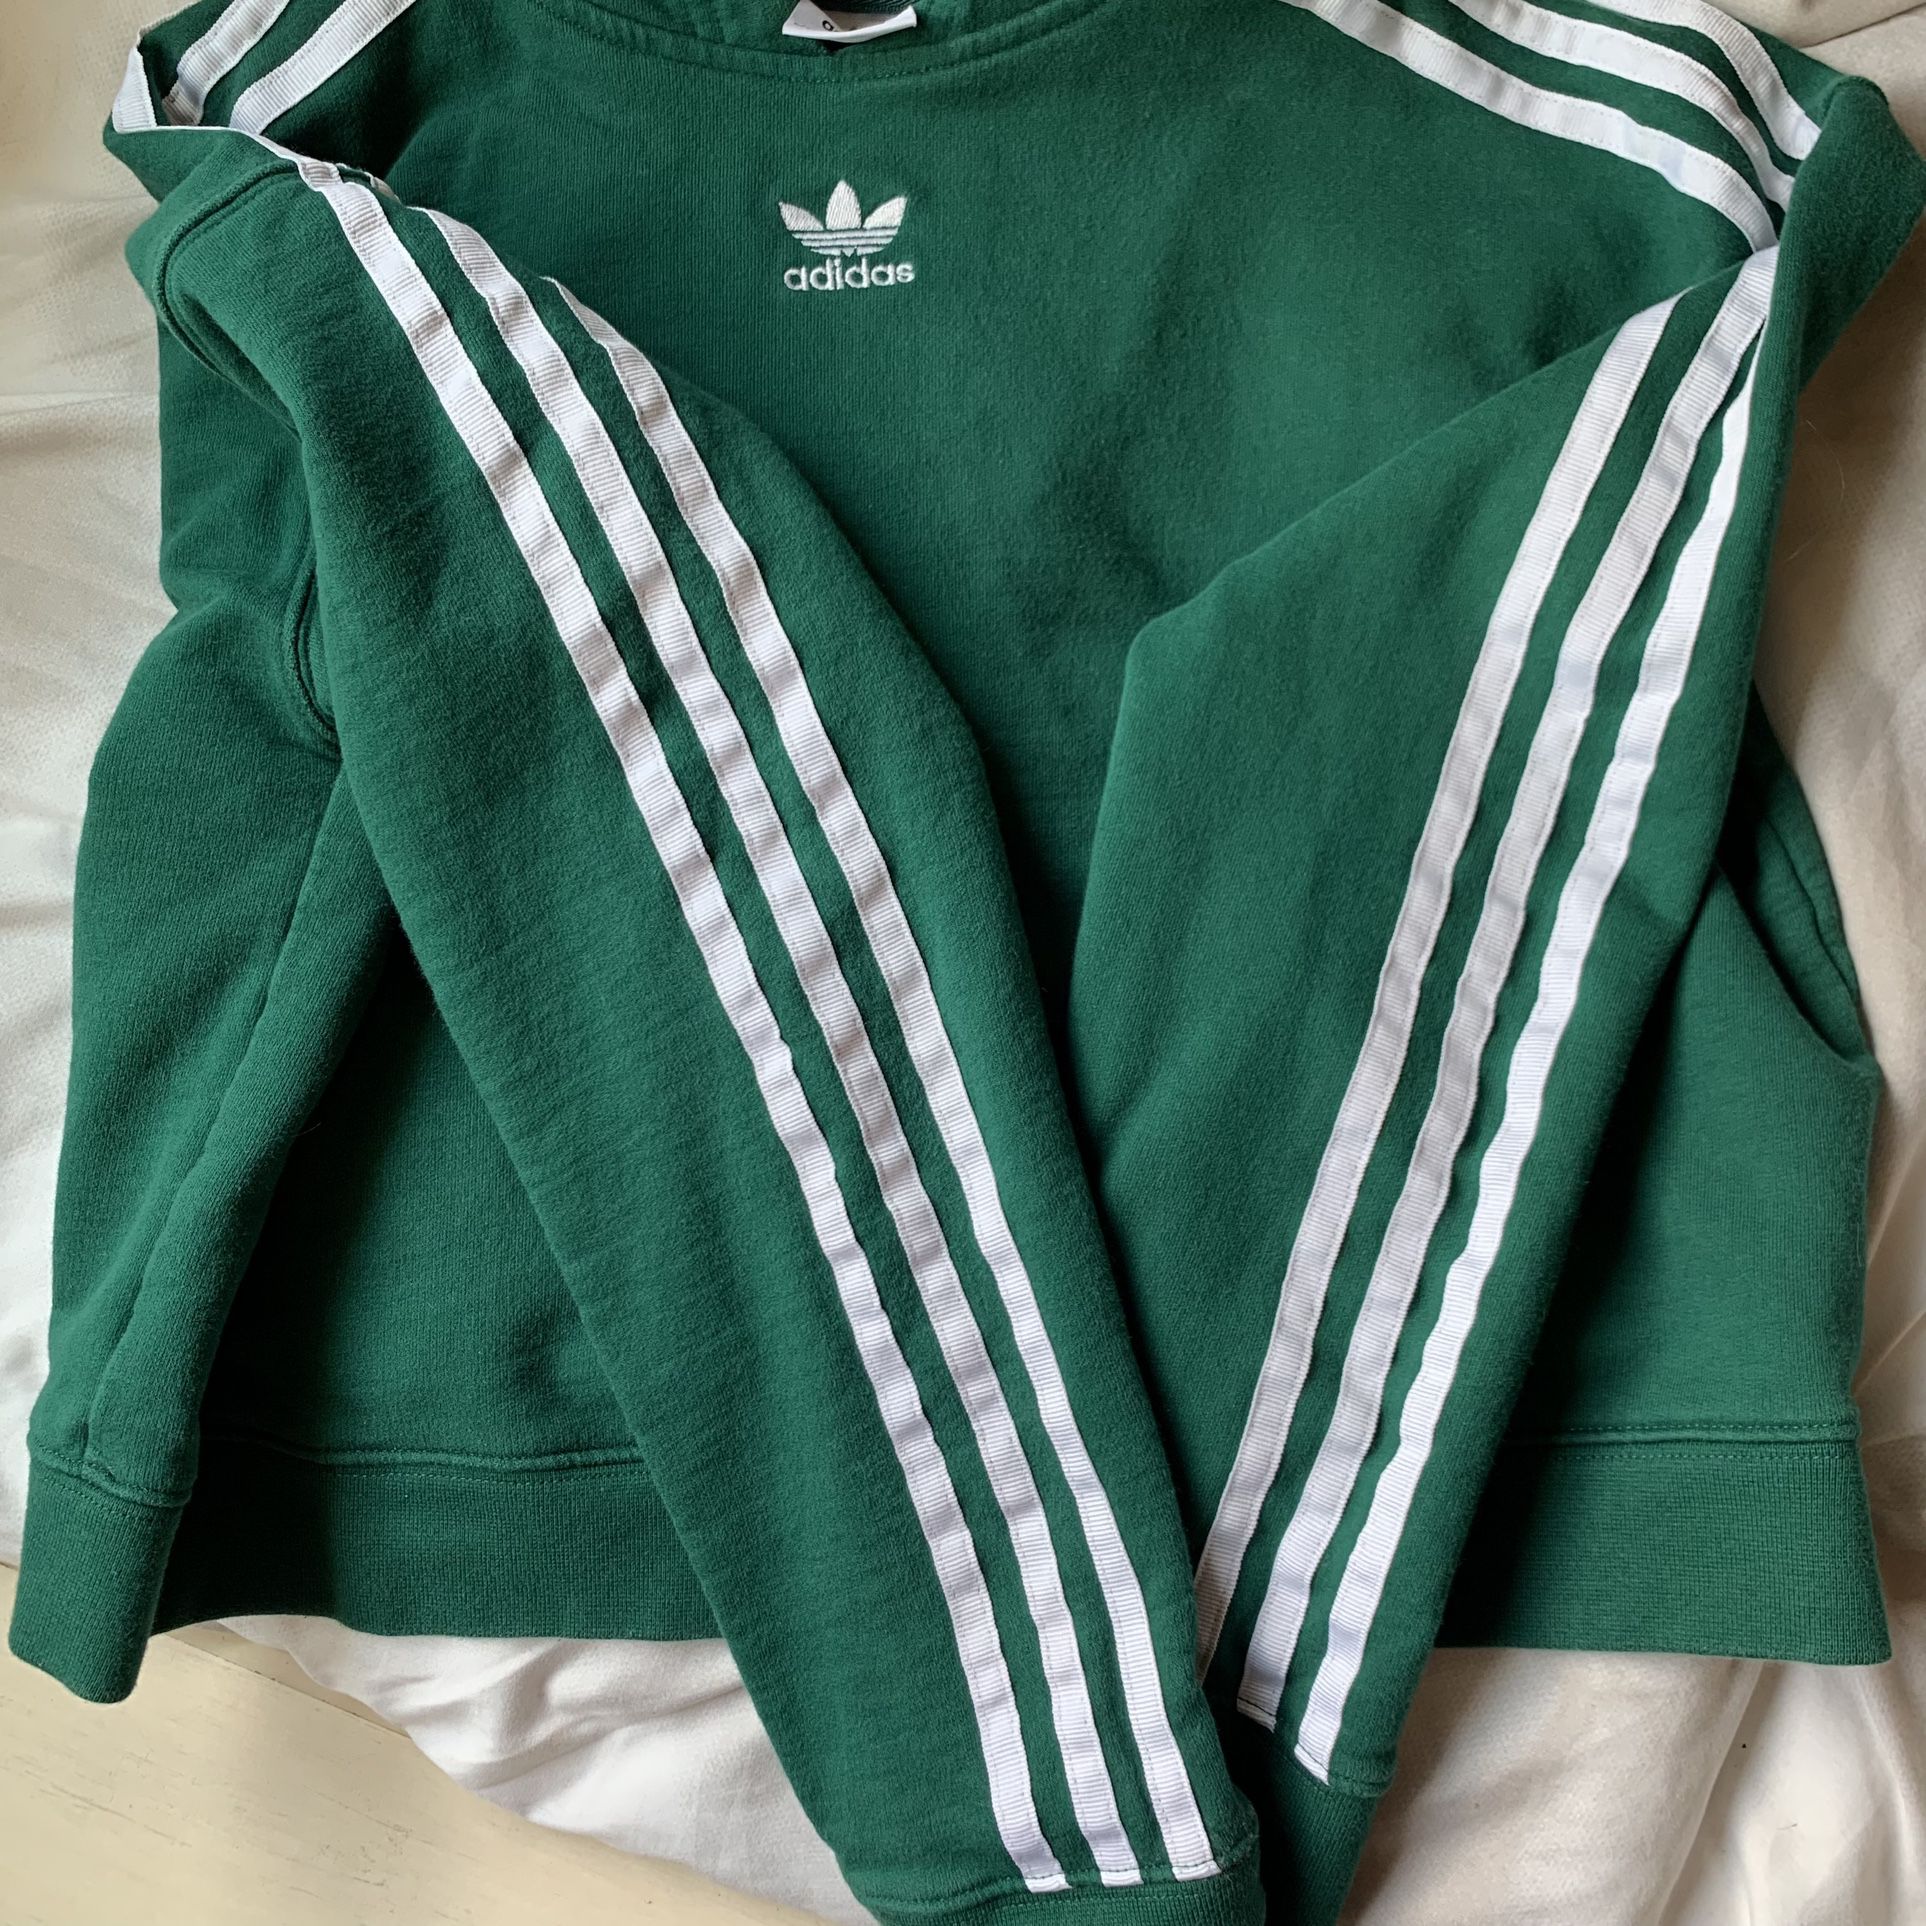 Adidas Cropped sweater!